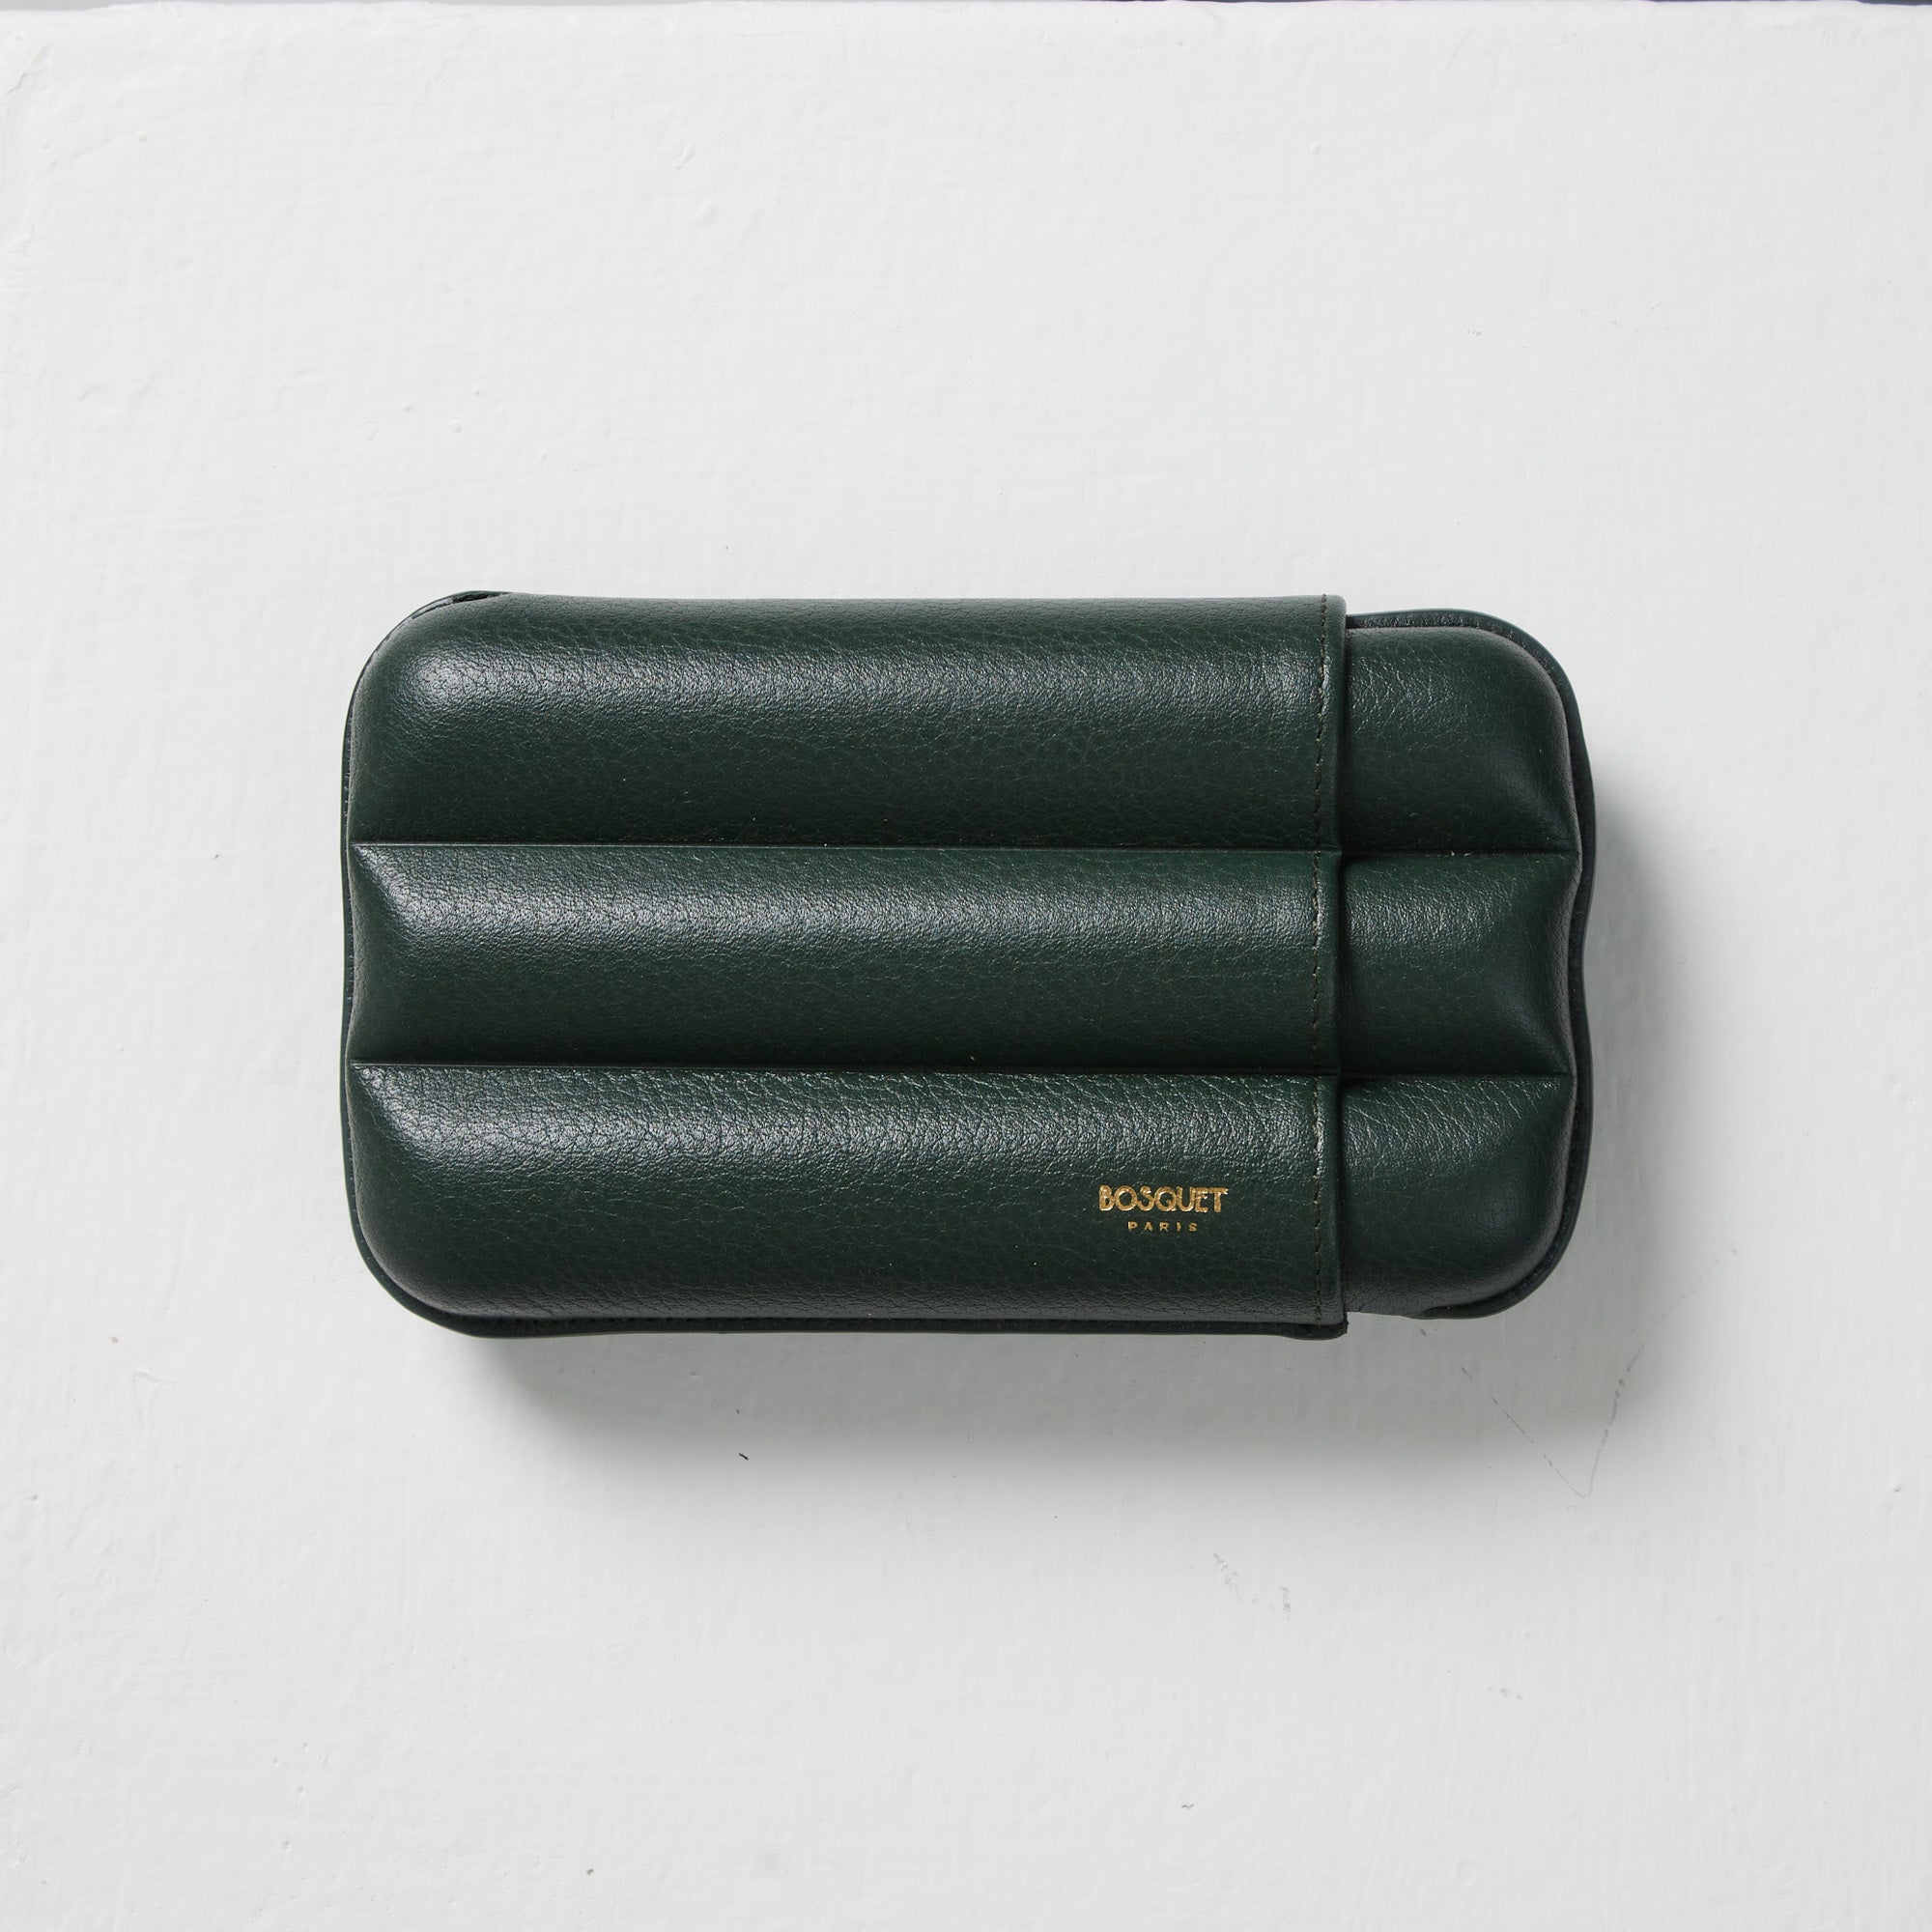 Bosquet Smooth Forest Green Cylindrical Leather Cigar Case